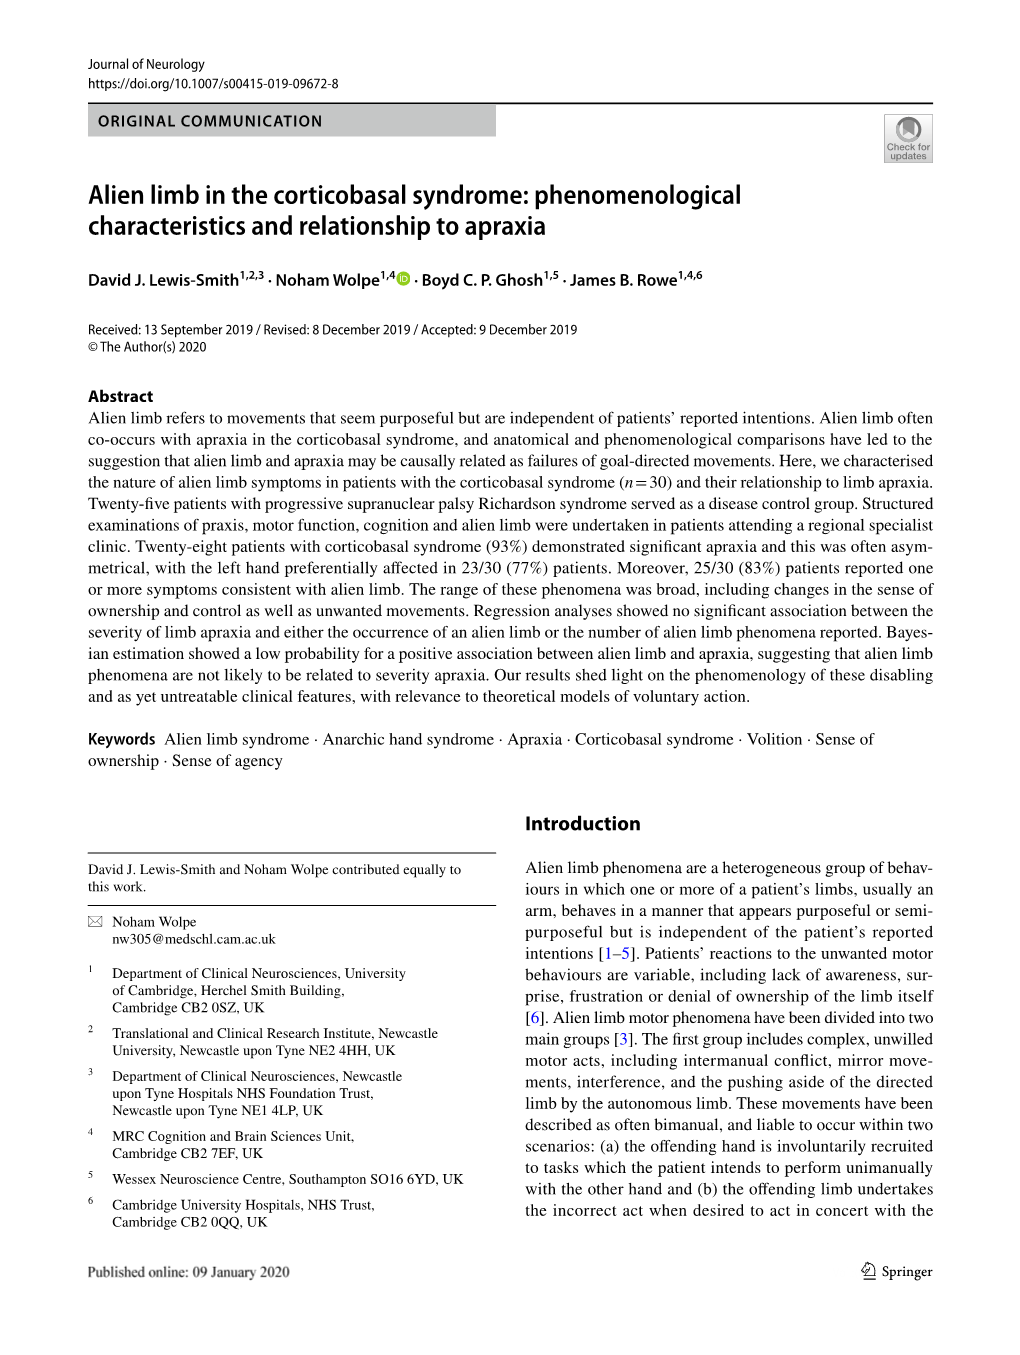 Alien Limb in the Corticobasal Syndrome: Phenomenological Characteristics and Relationship to Apraxia